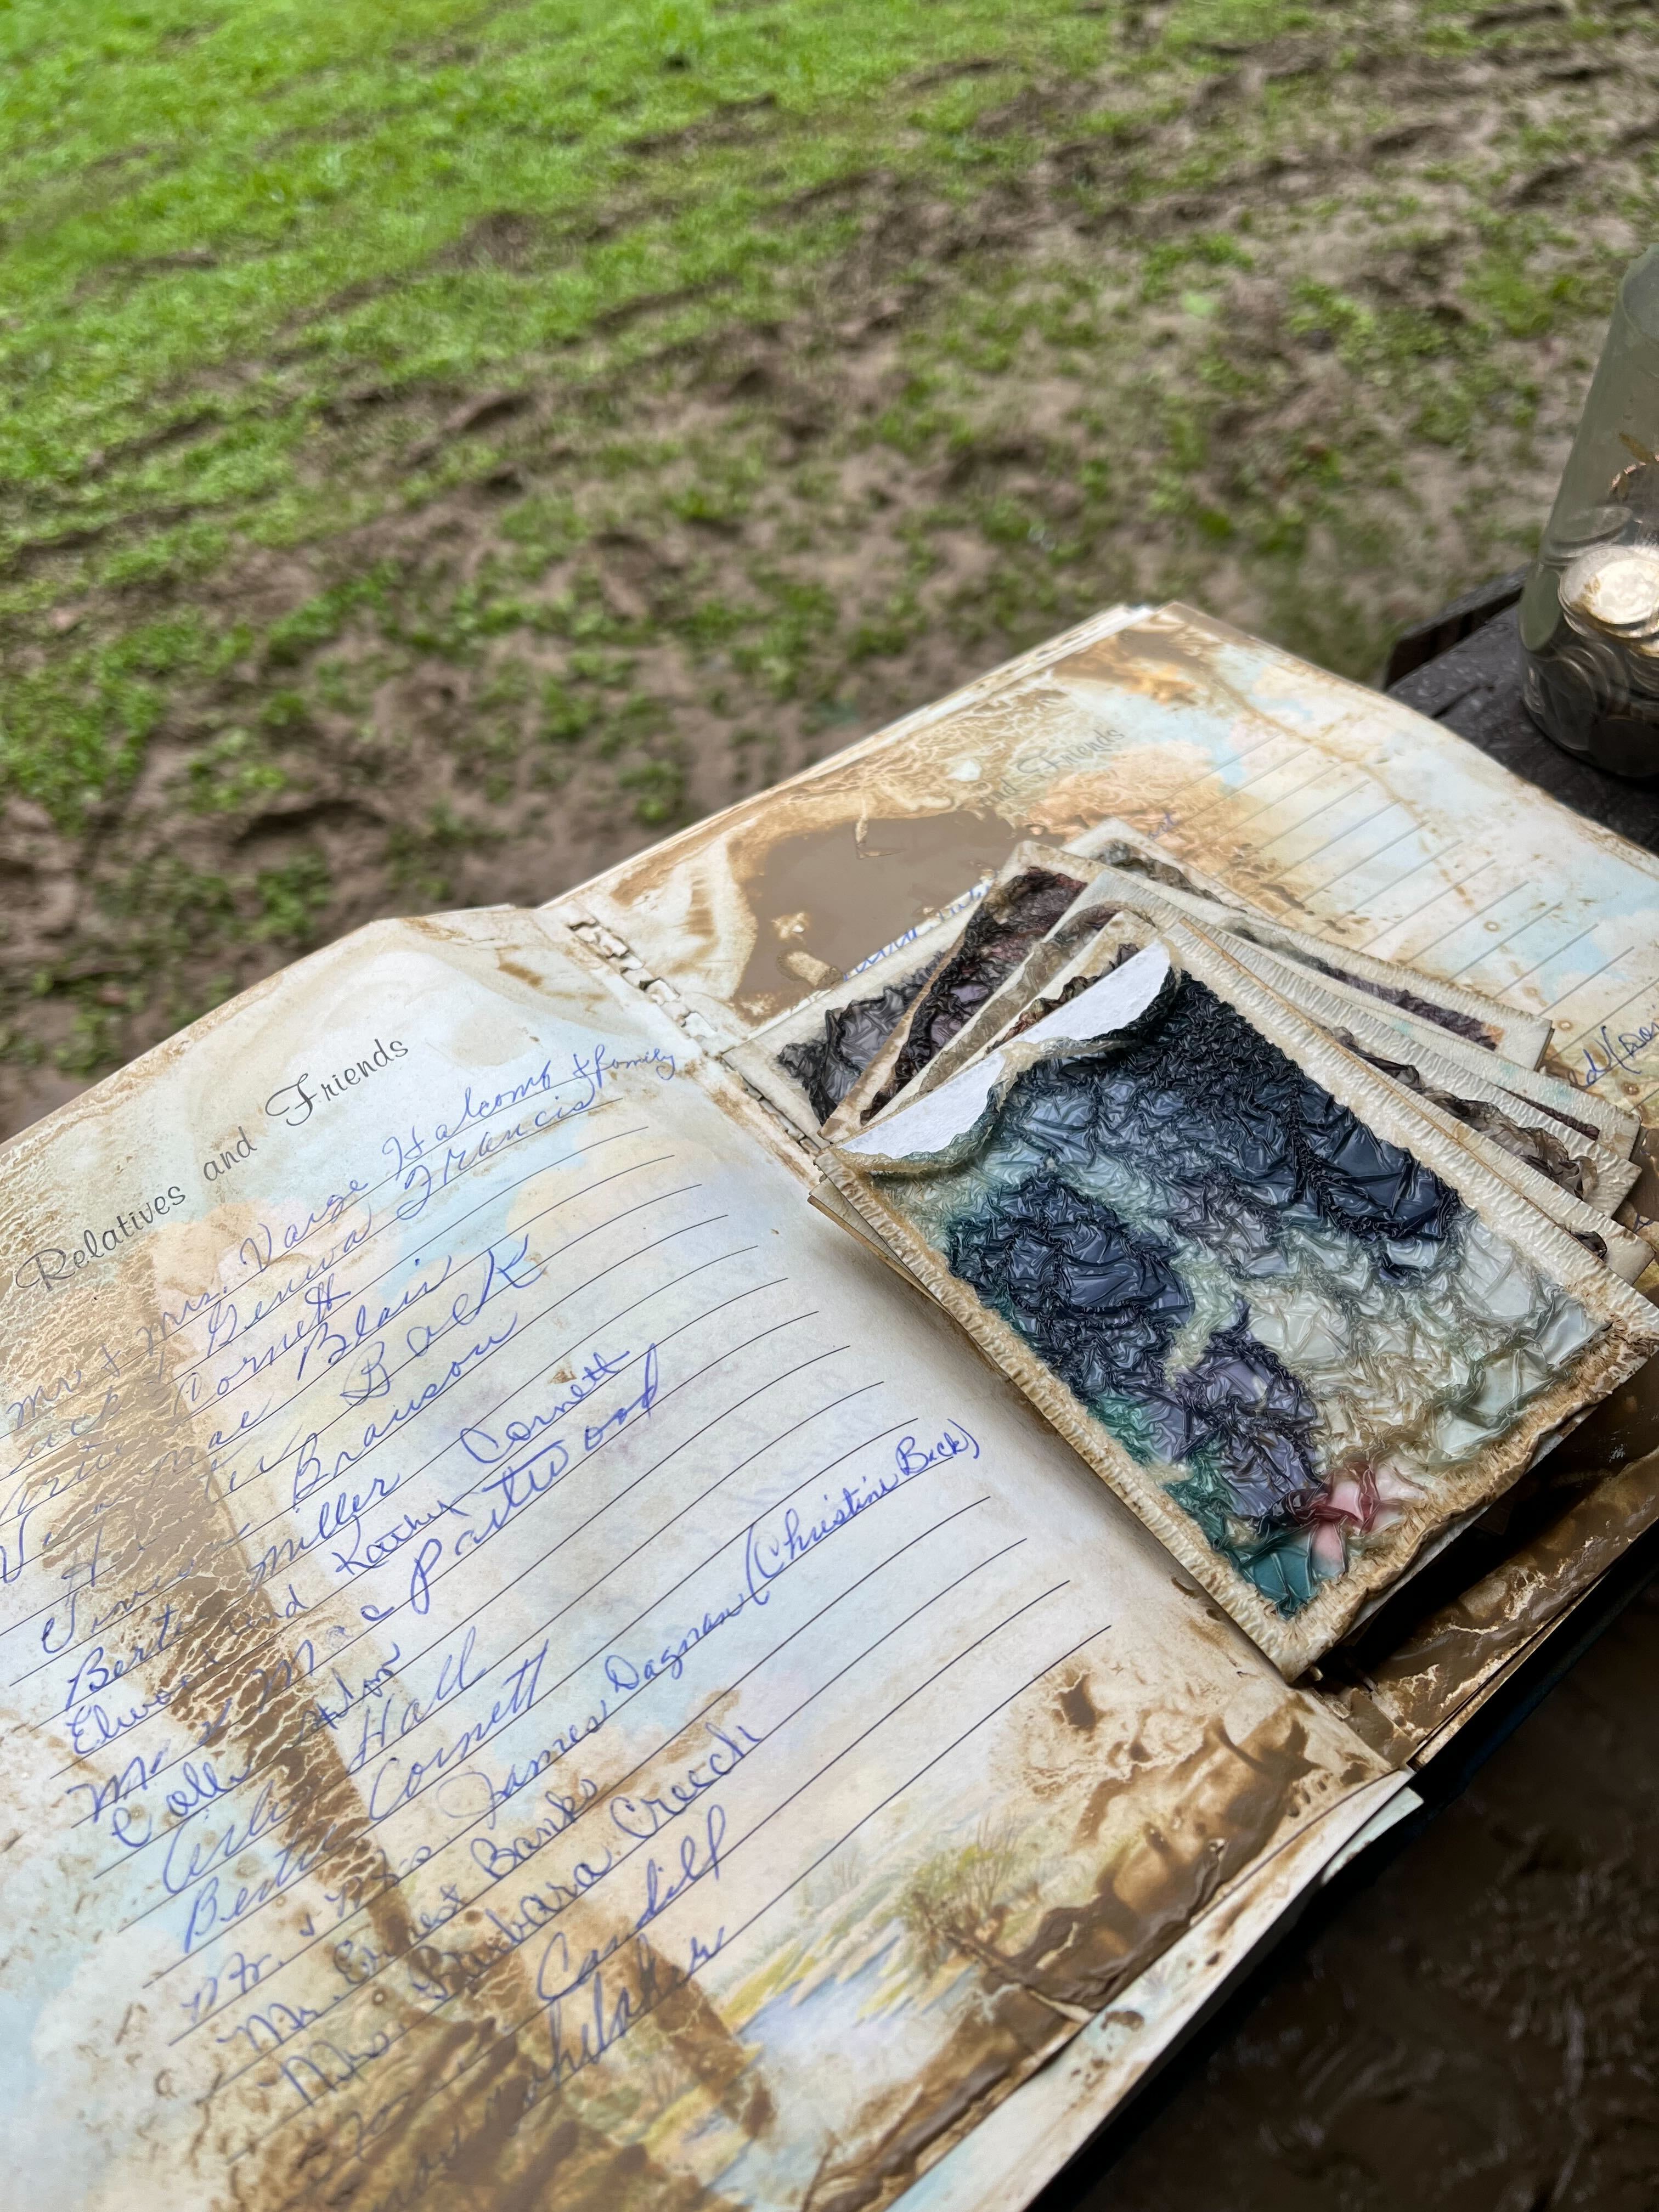 Many Appalachians cherish a "family bible," a book recording details about the family lineage going back generations. Bolen's family dries out theirs after it was ruined by the flood, Knott County, Kentucky, July 29, 2022. (Shared by Lakyn Bolen)